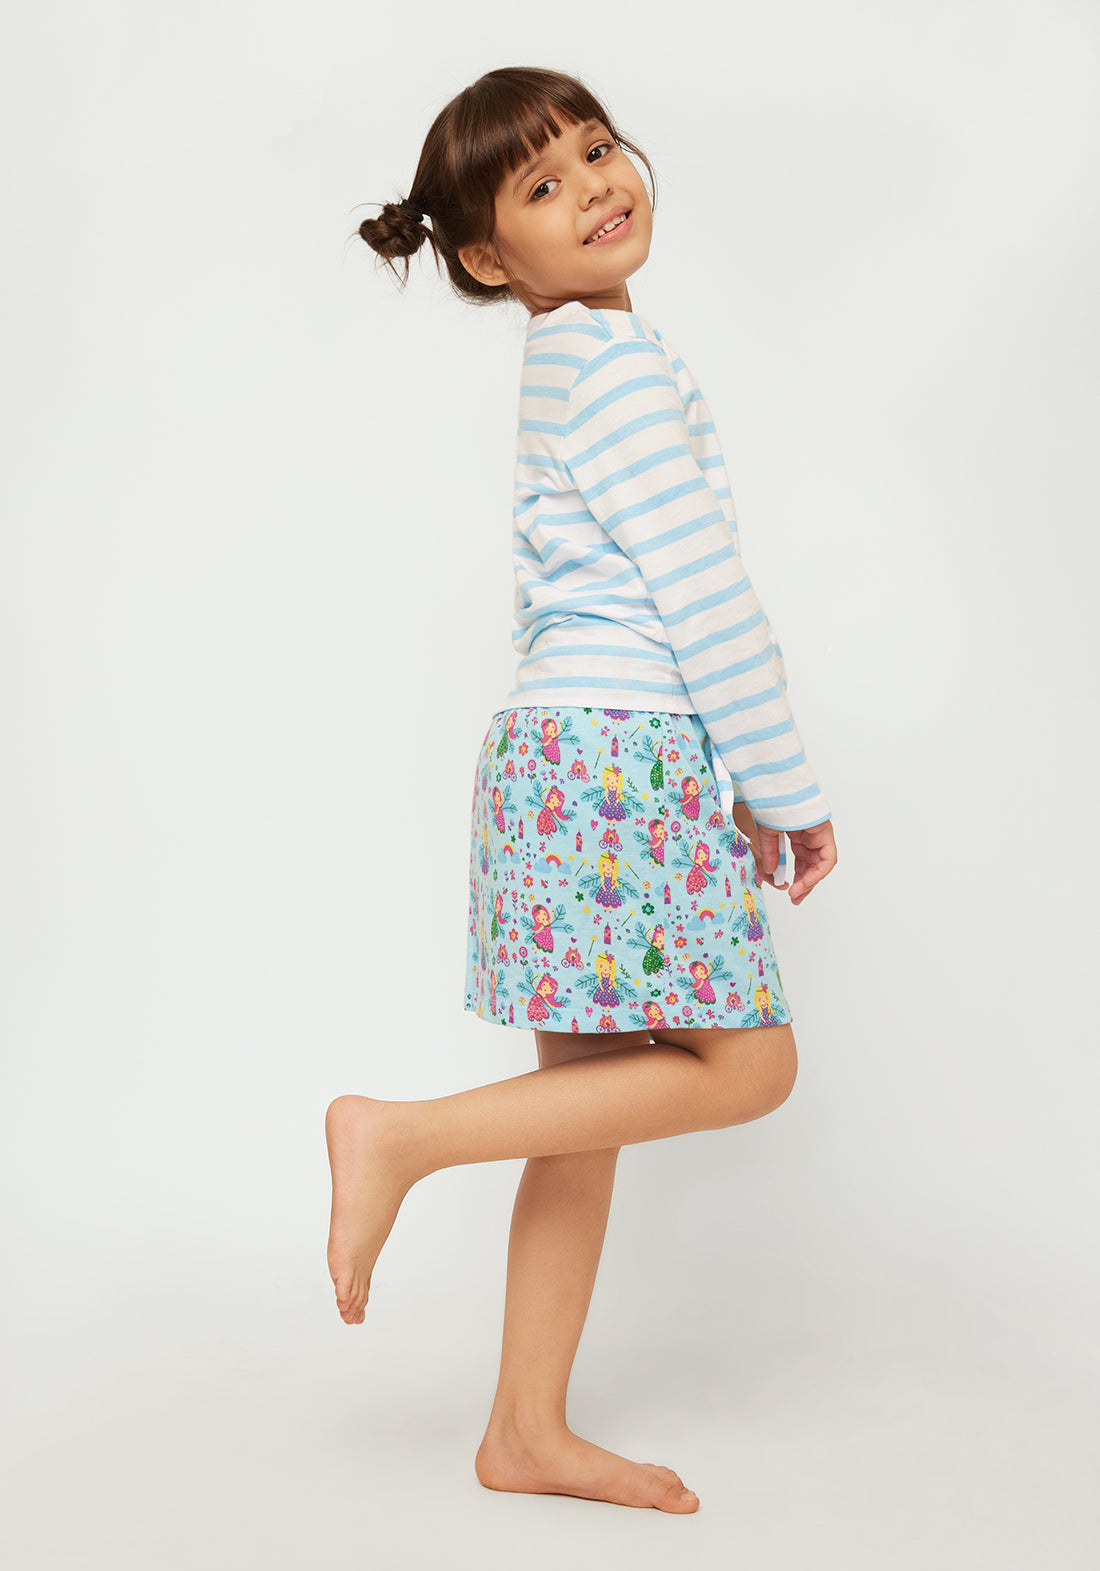 Stripe T-shirt with Multicolor Fairies Printed skirt co-ord Set